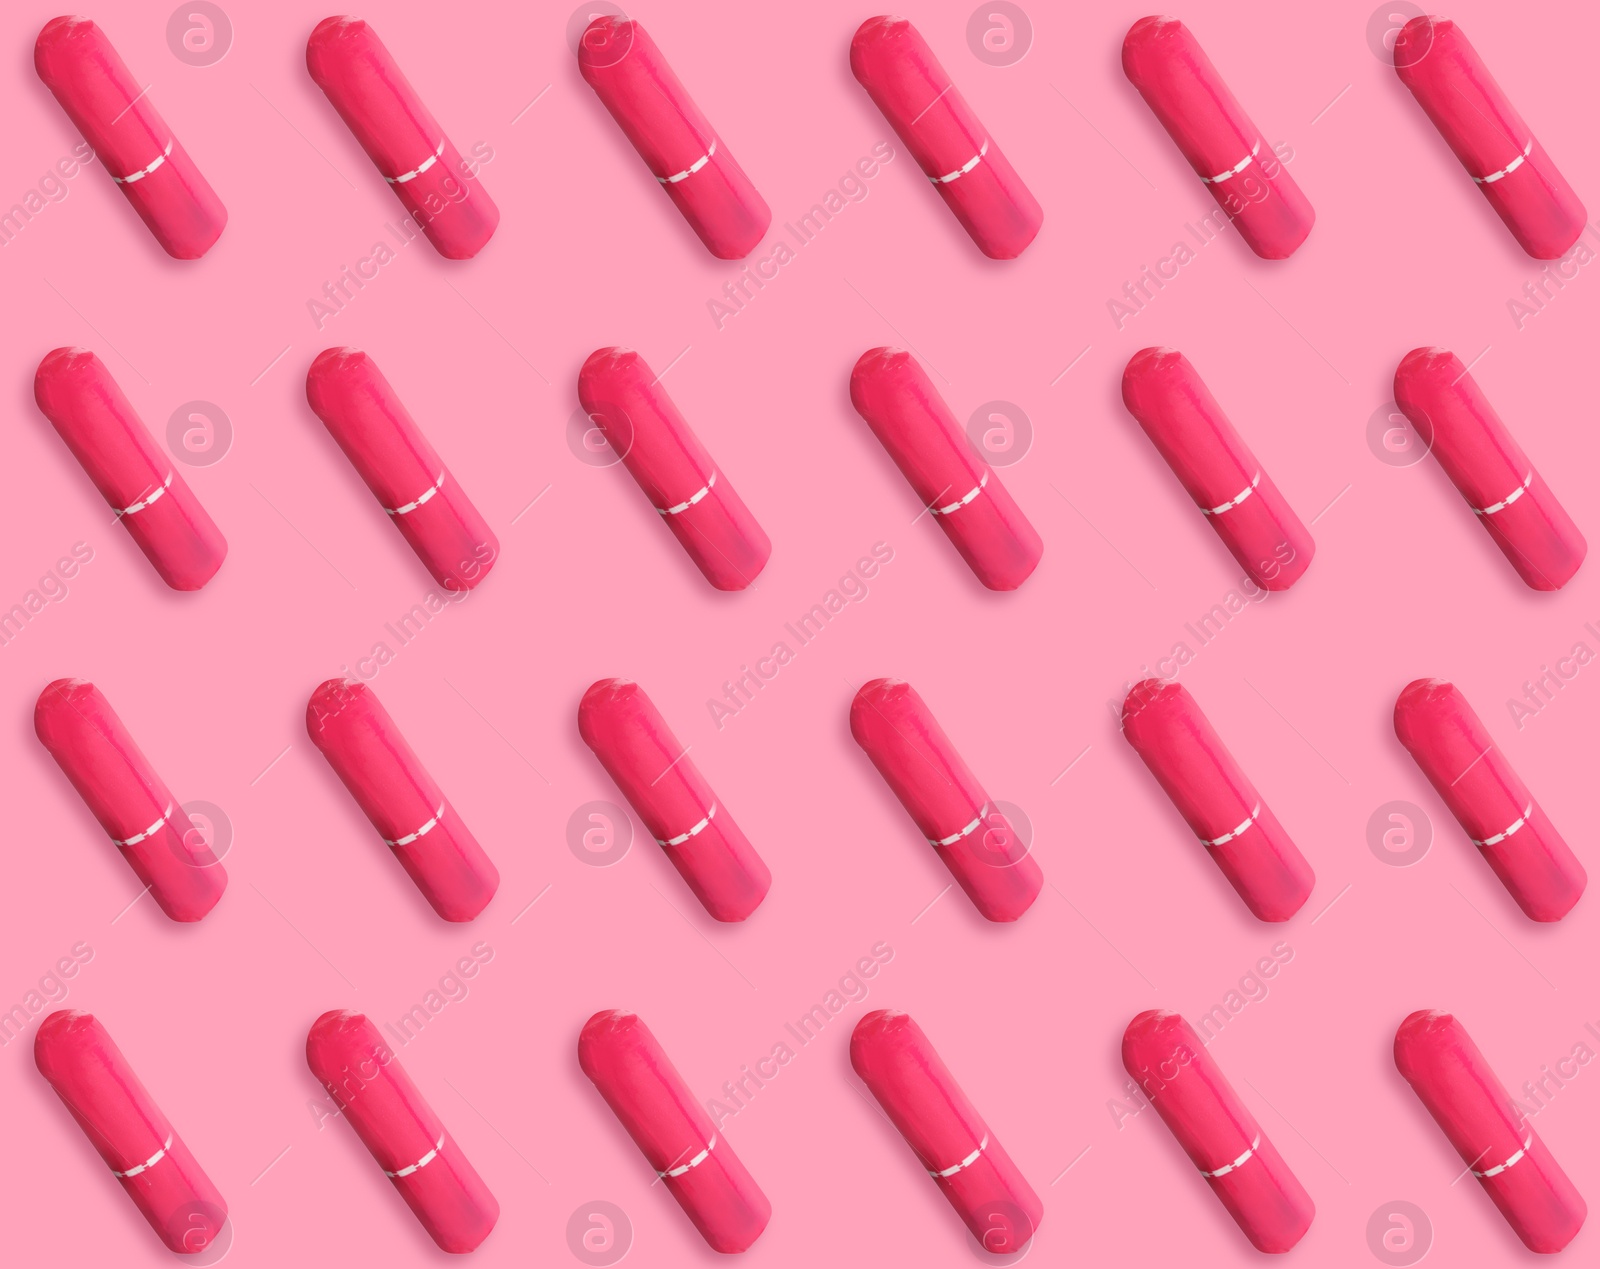 Image of Many tampons on pink background, flat lay 